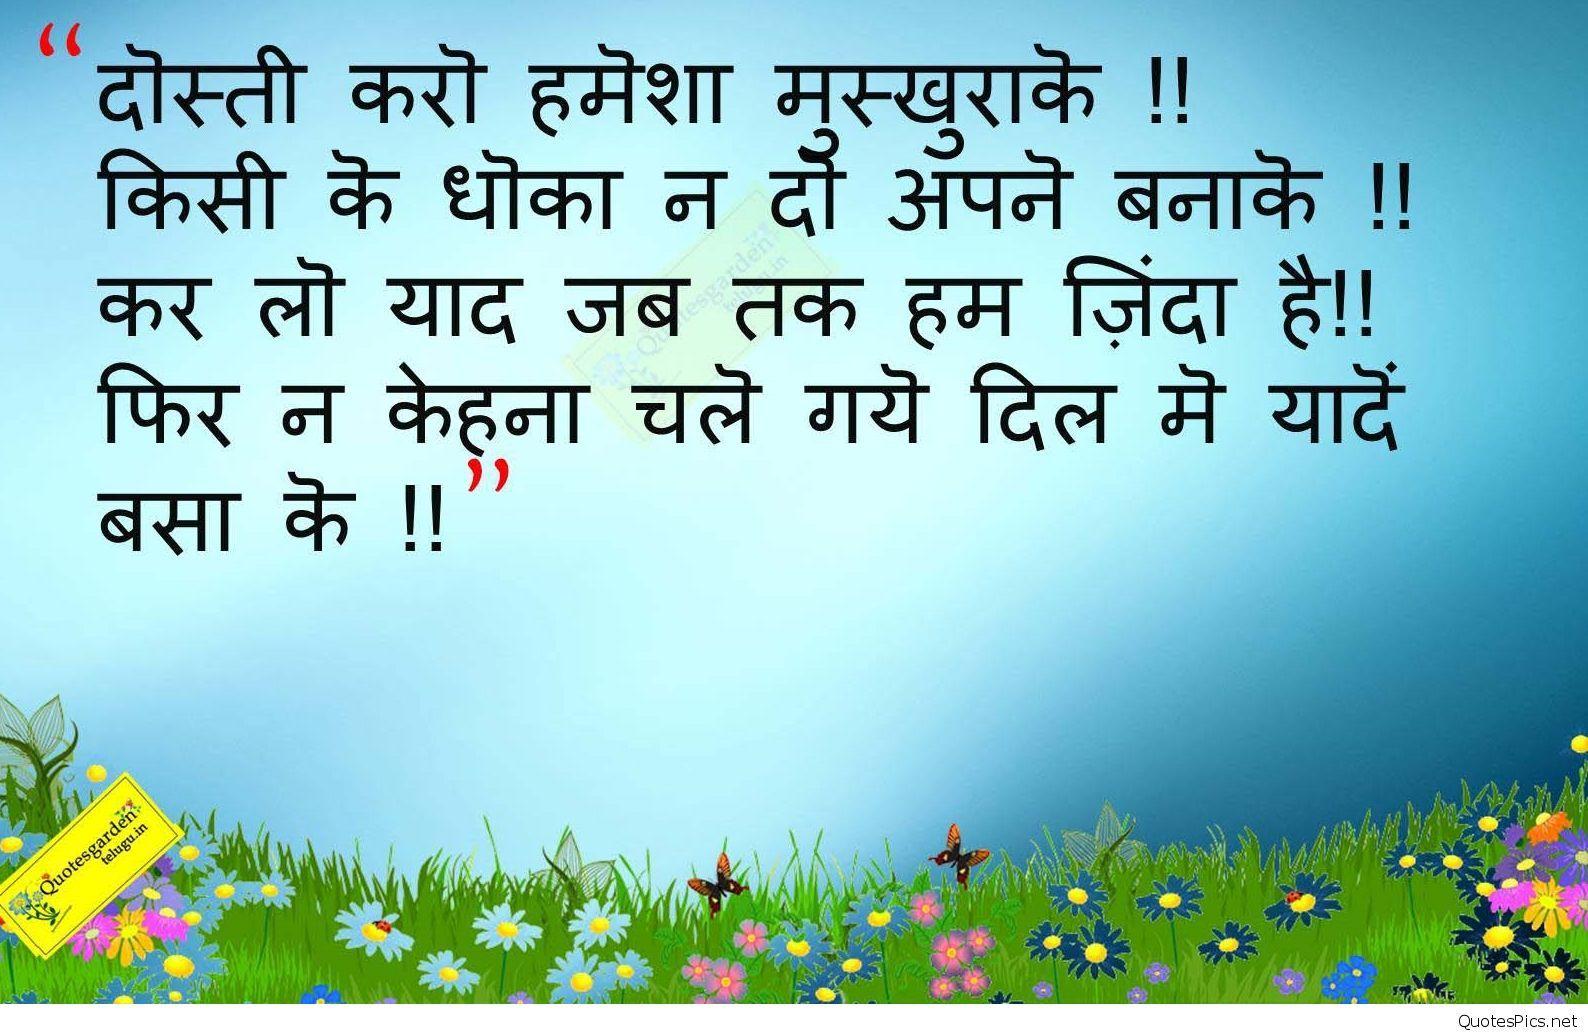 Meaningful Quotes About Life And Love With Image In Hindi